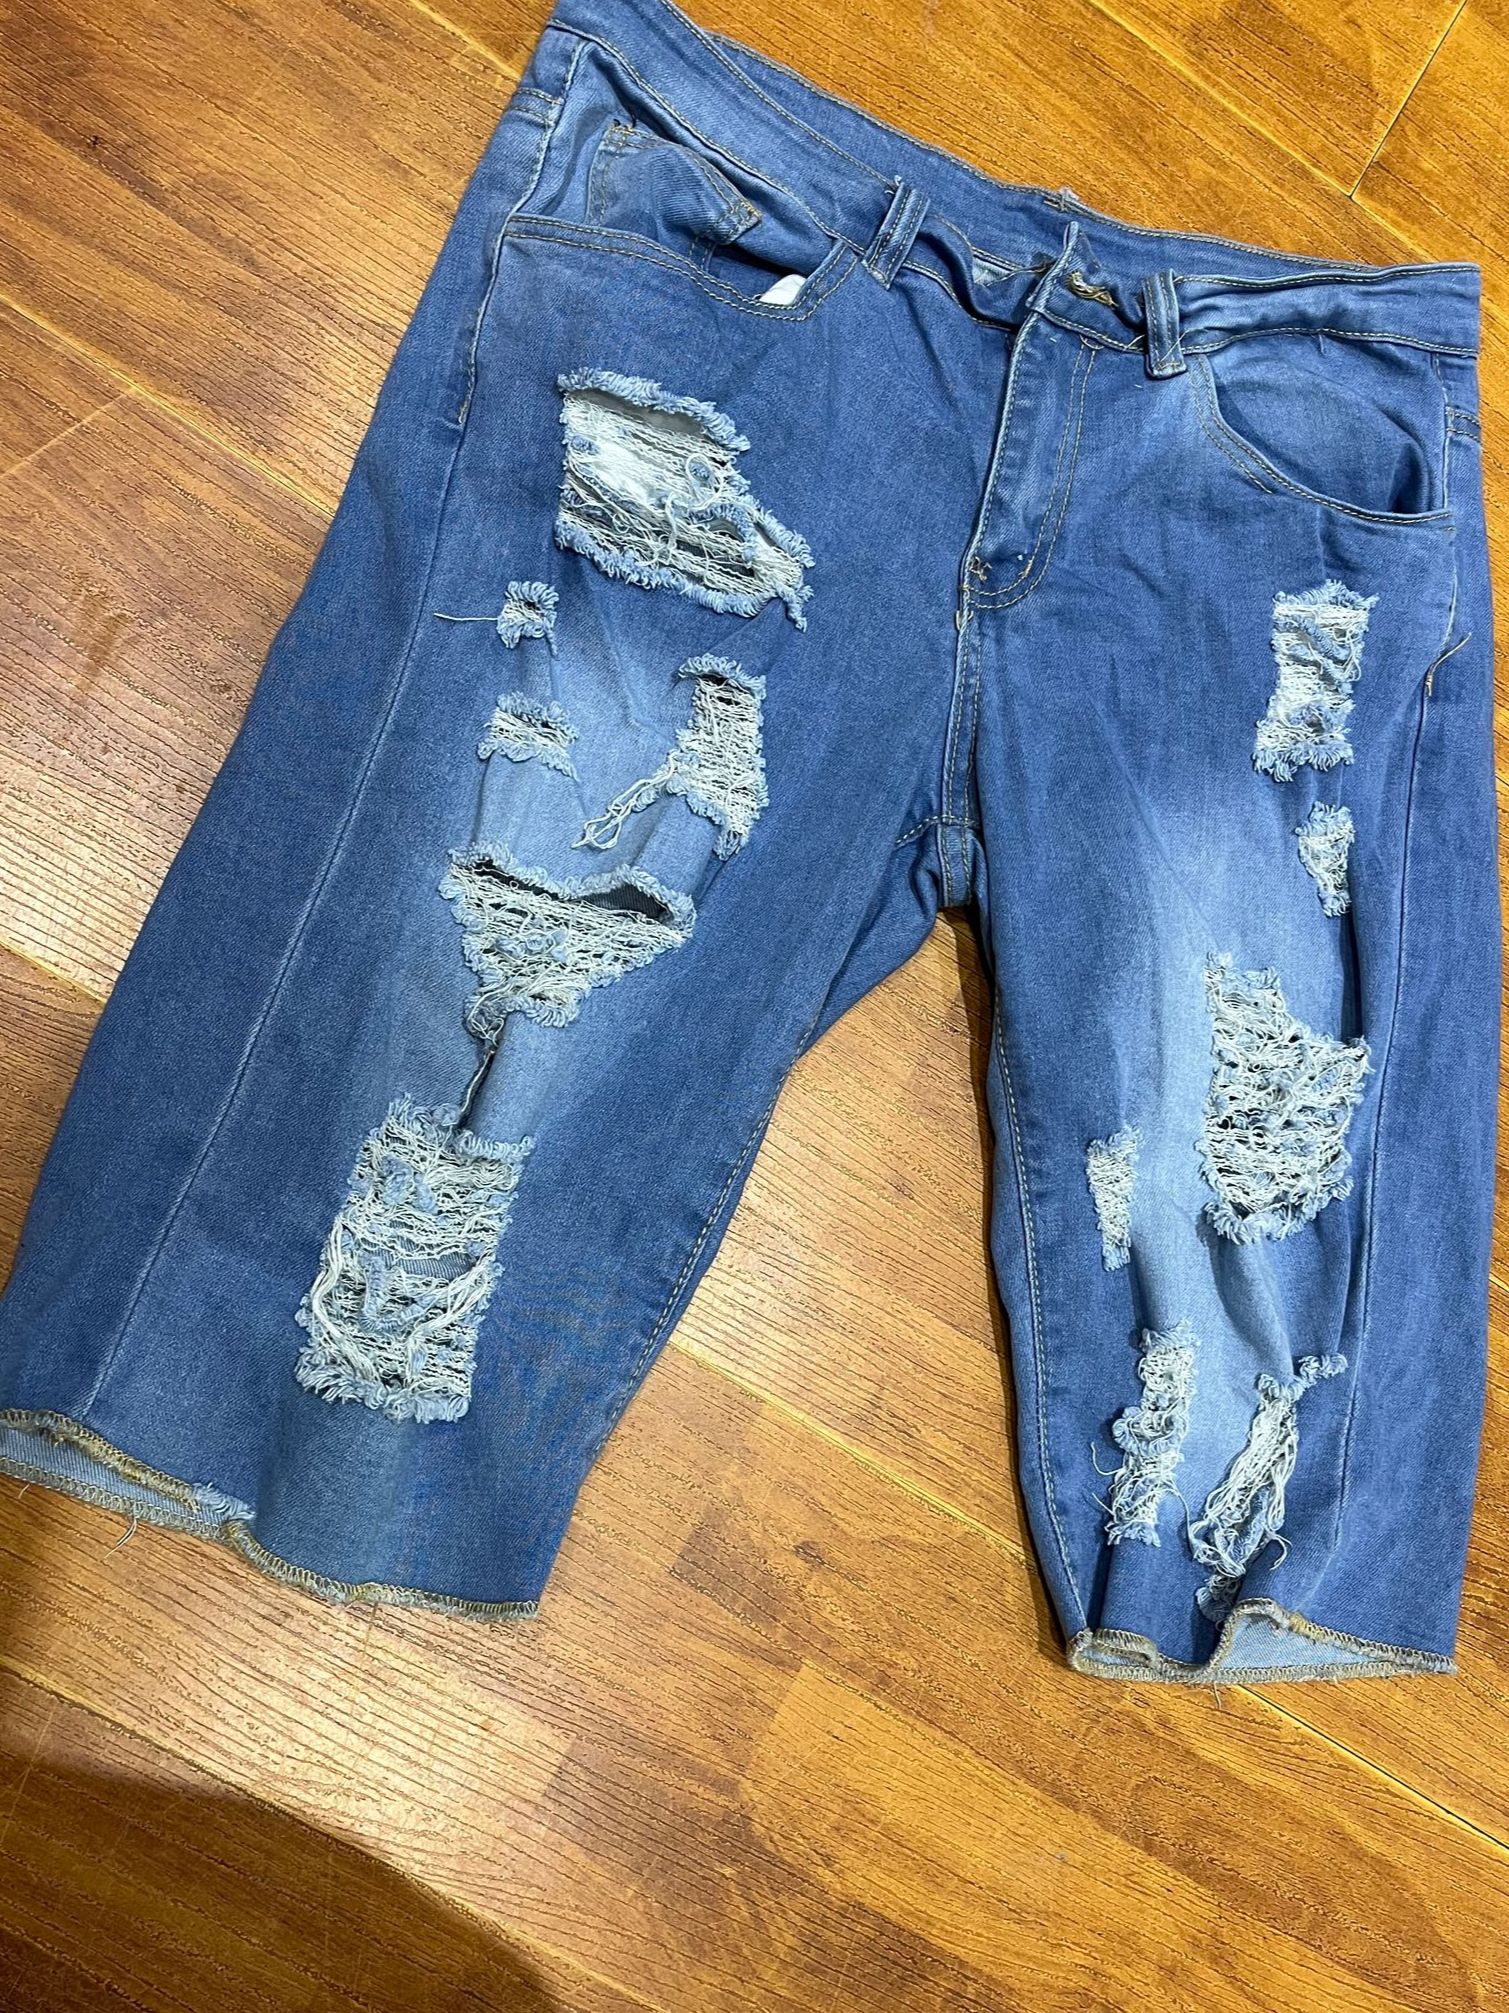 MAKE AN OLD STYLE DENIM MAONG TOKONG SHORT WITH HIGH QUALITY AND ...